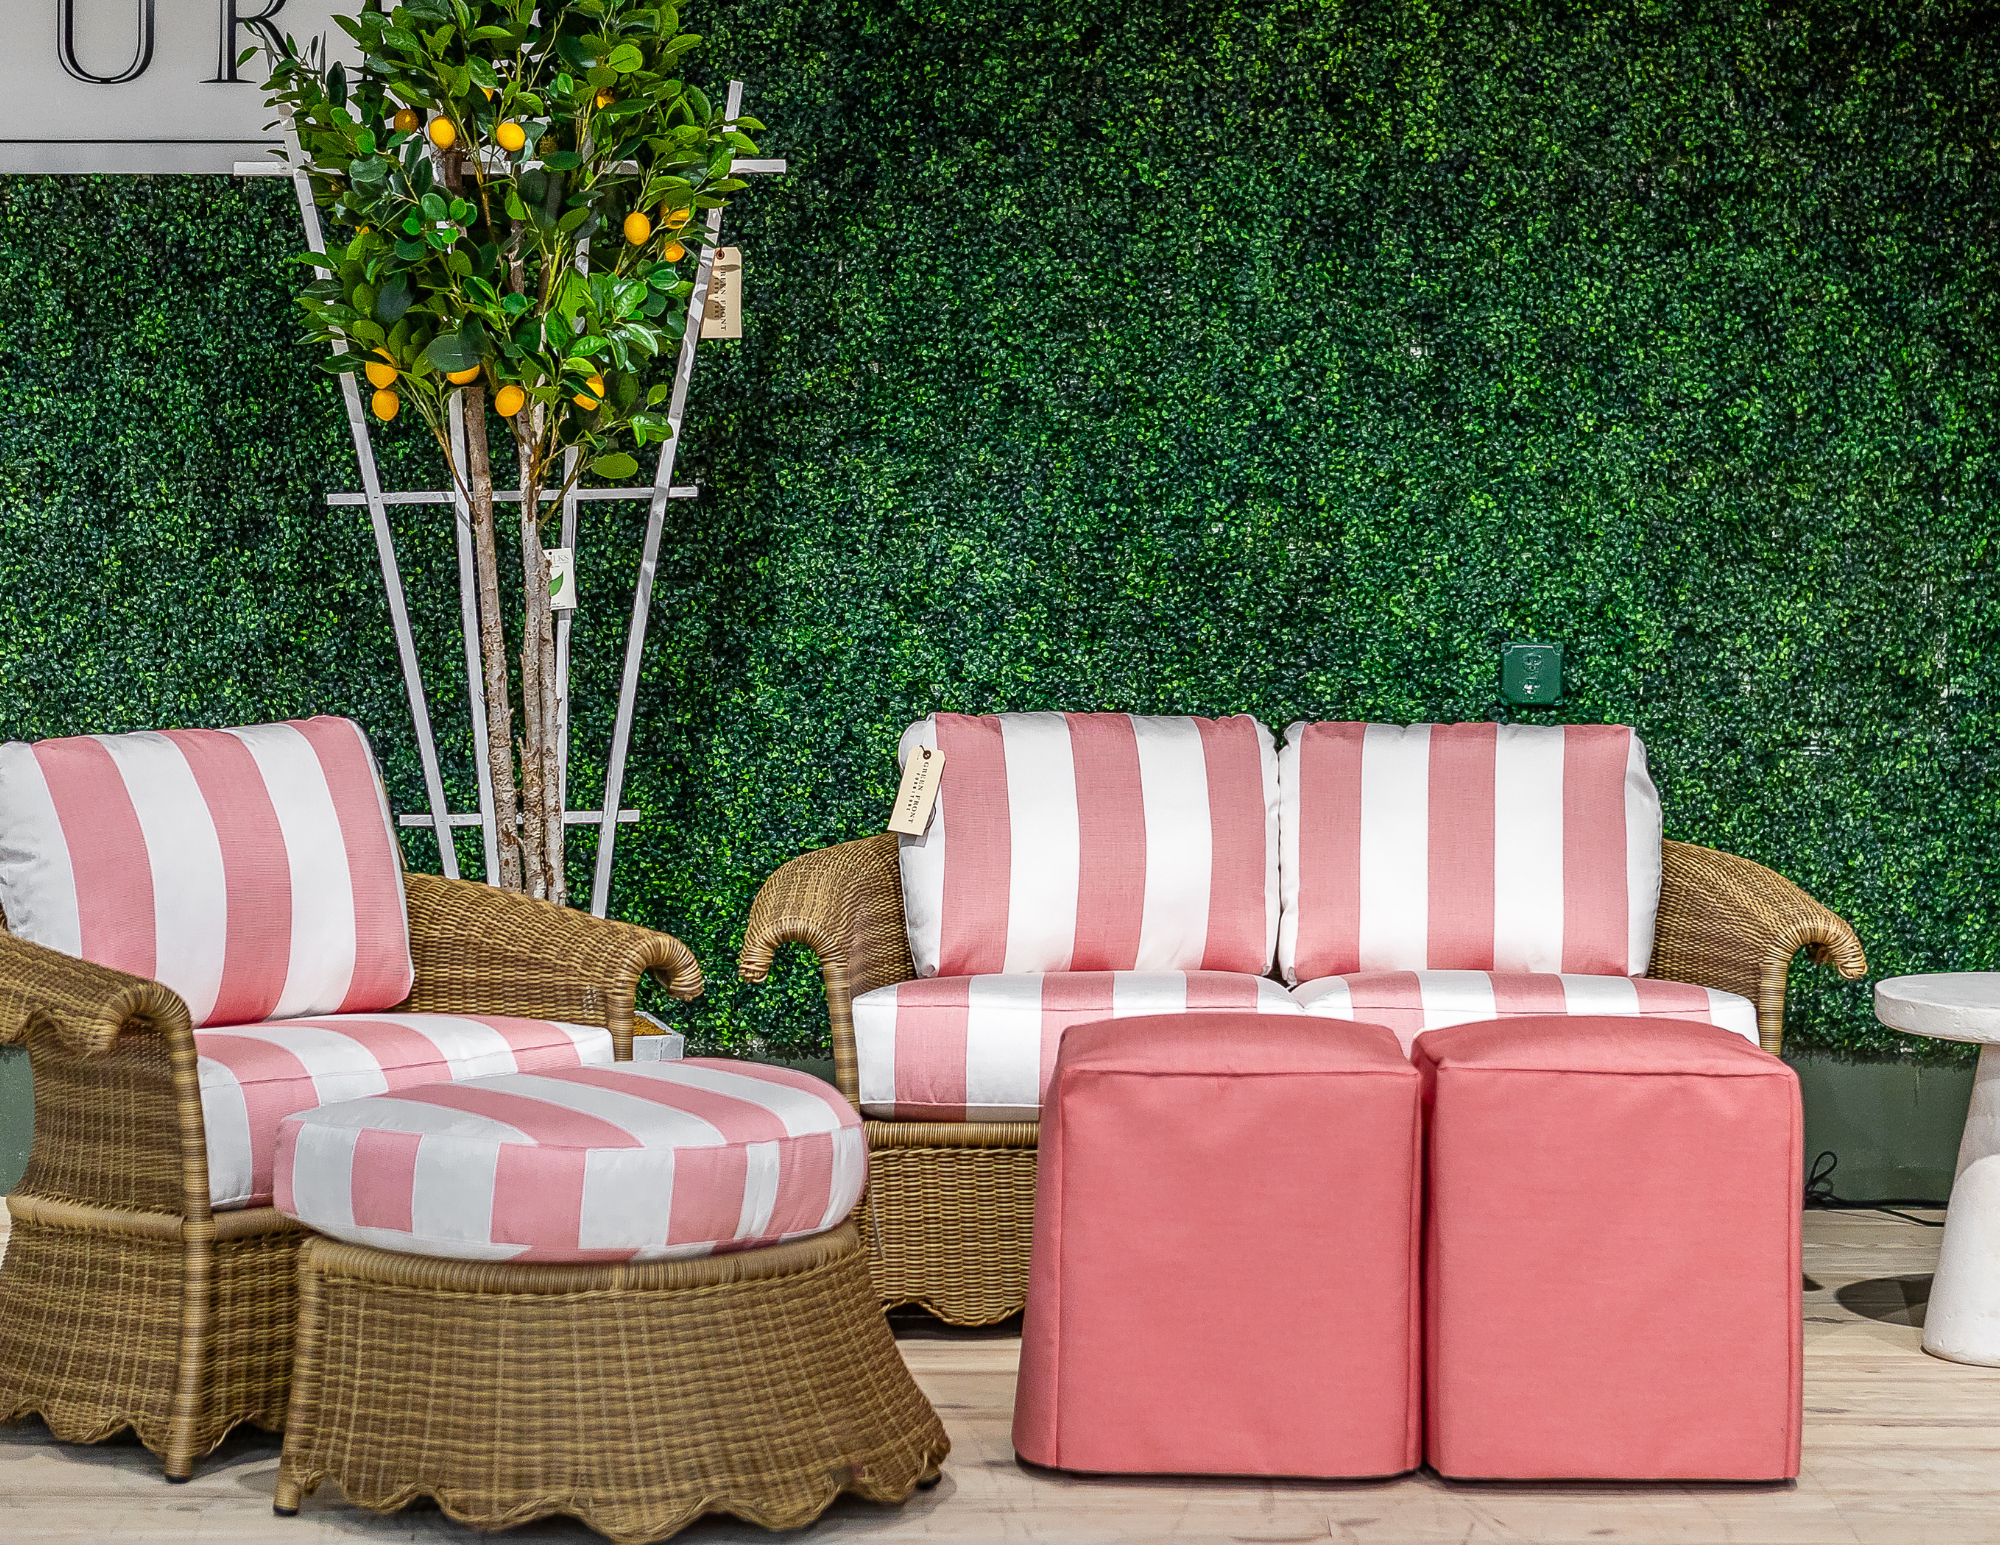 Green Front Furniture Pink and white outdoor furniture set